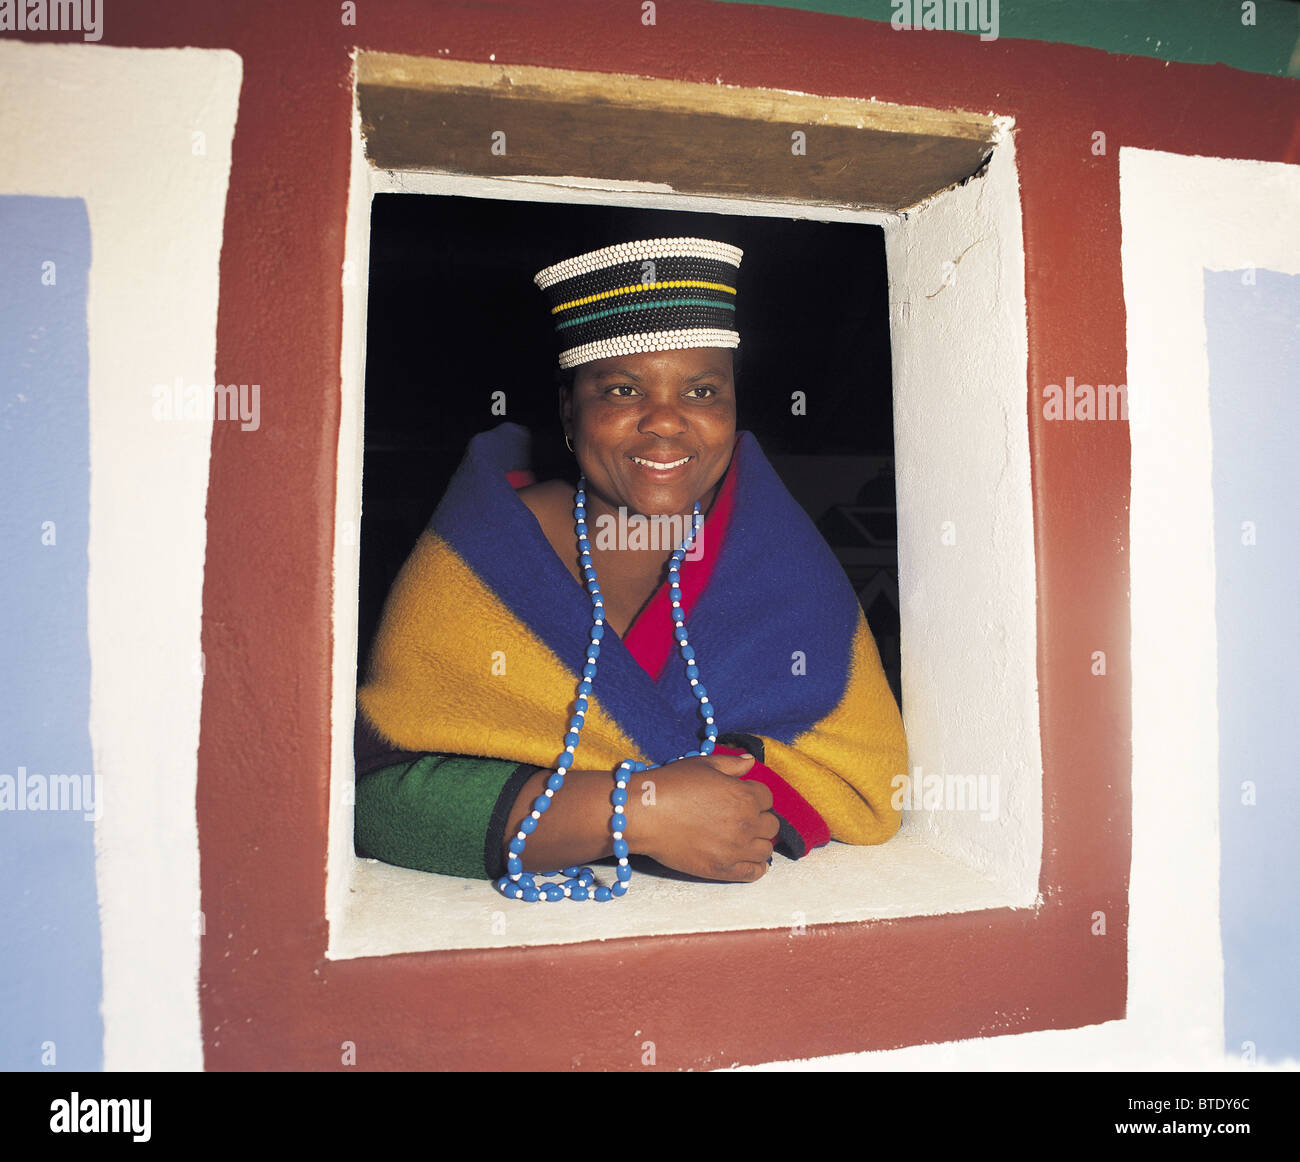 A portrait of a smiling Ndebele woman looking out of a window. Stock Photo